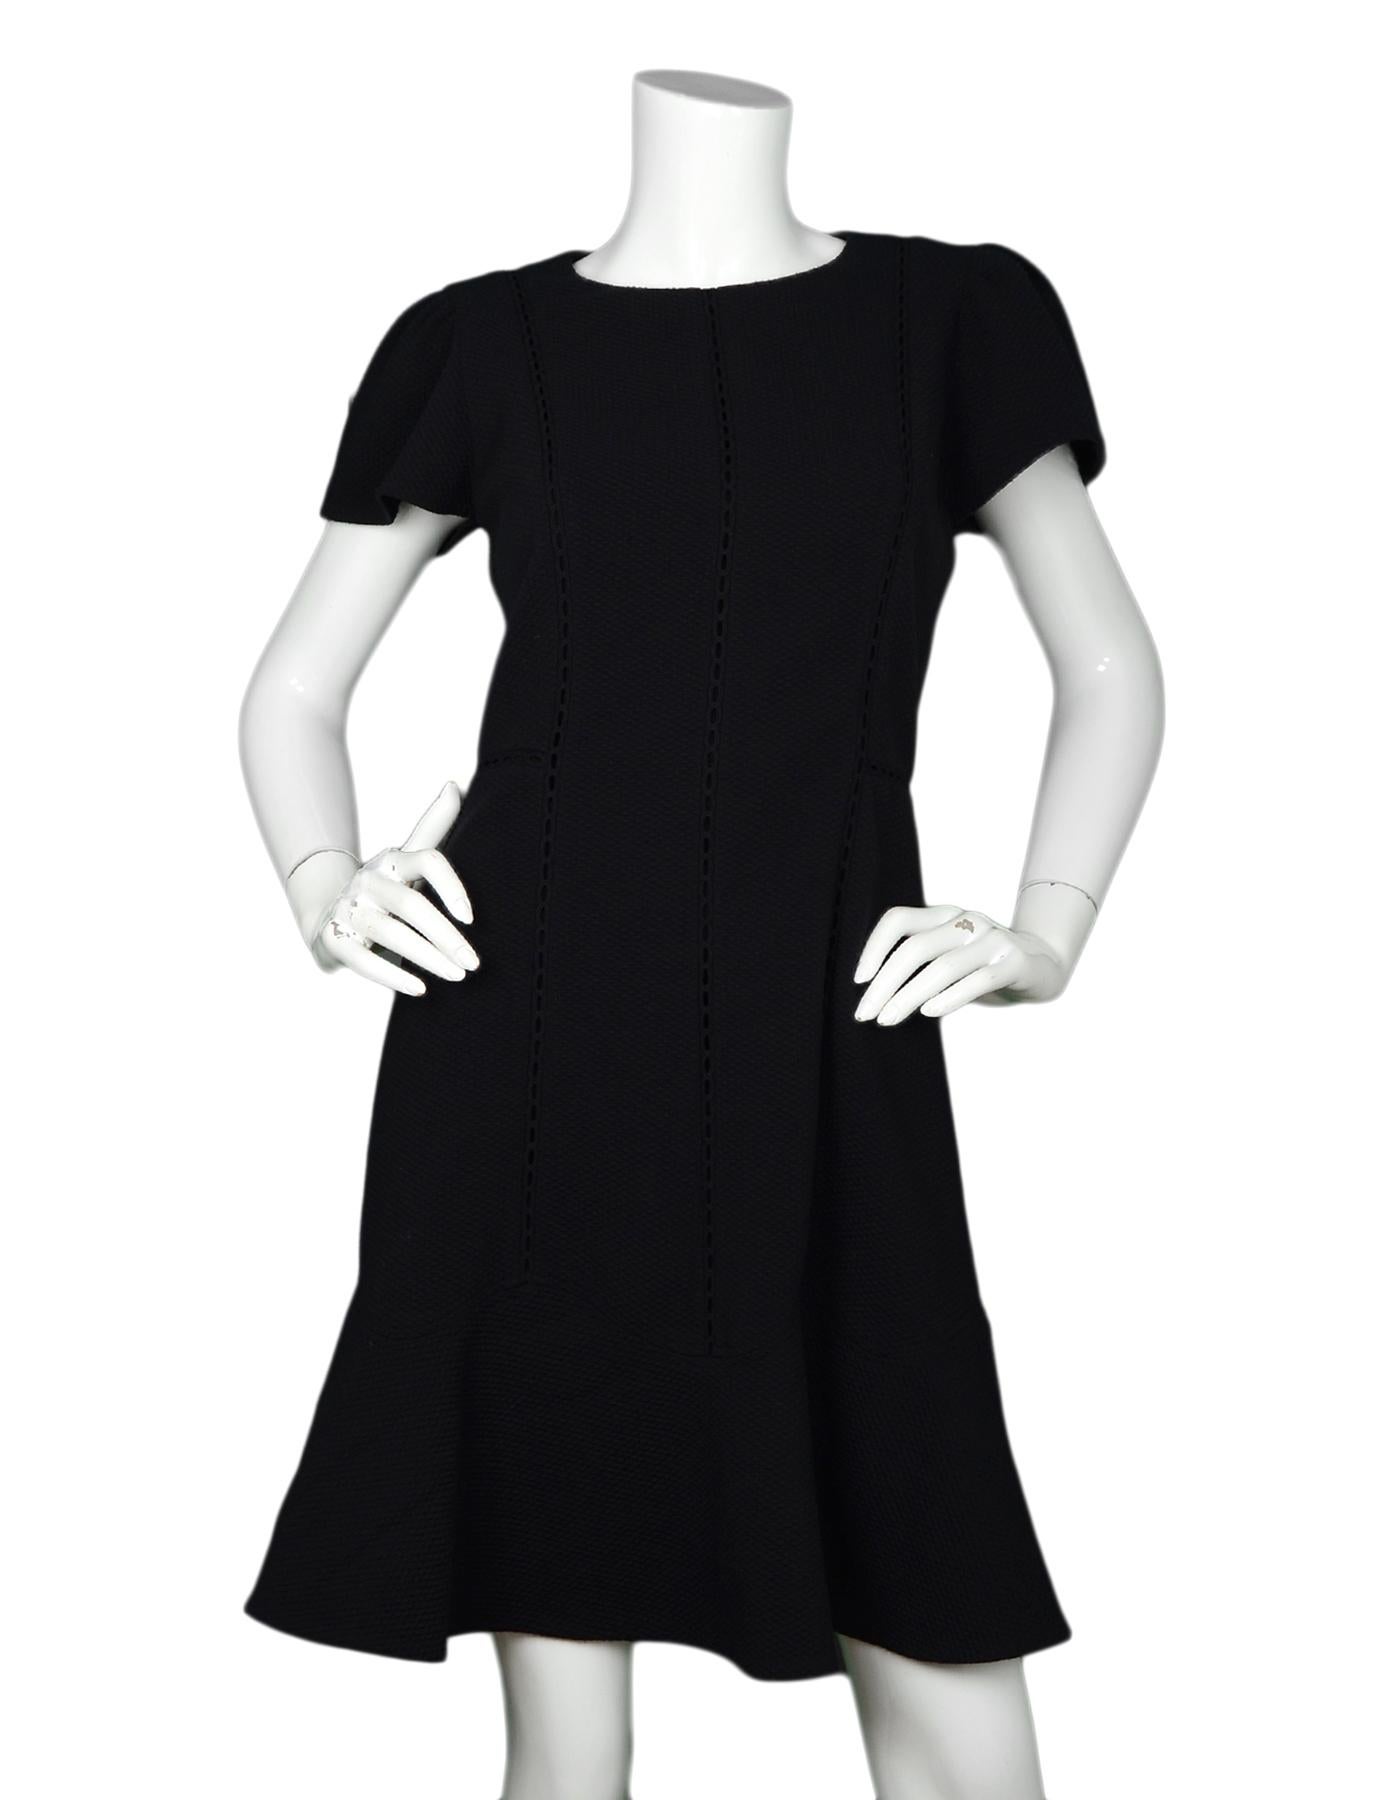 Rebecca Taylor NWT Black Shortsleeve Dress W/ Eyelet Detail Sz 8

Made In:  China
Color: Black
Materials: 94% polyester, 6% elastane 
Lining: 100% polyester
Opening/Closure: Hidden back zipper and hook eye 
Overall Condition: New with tags
Estimated